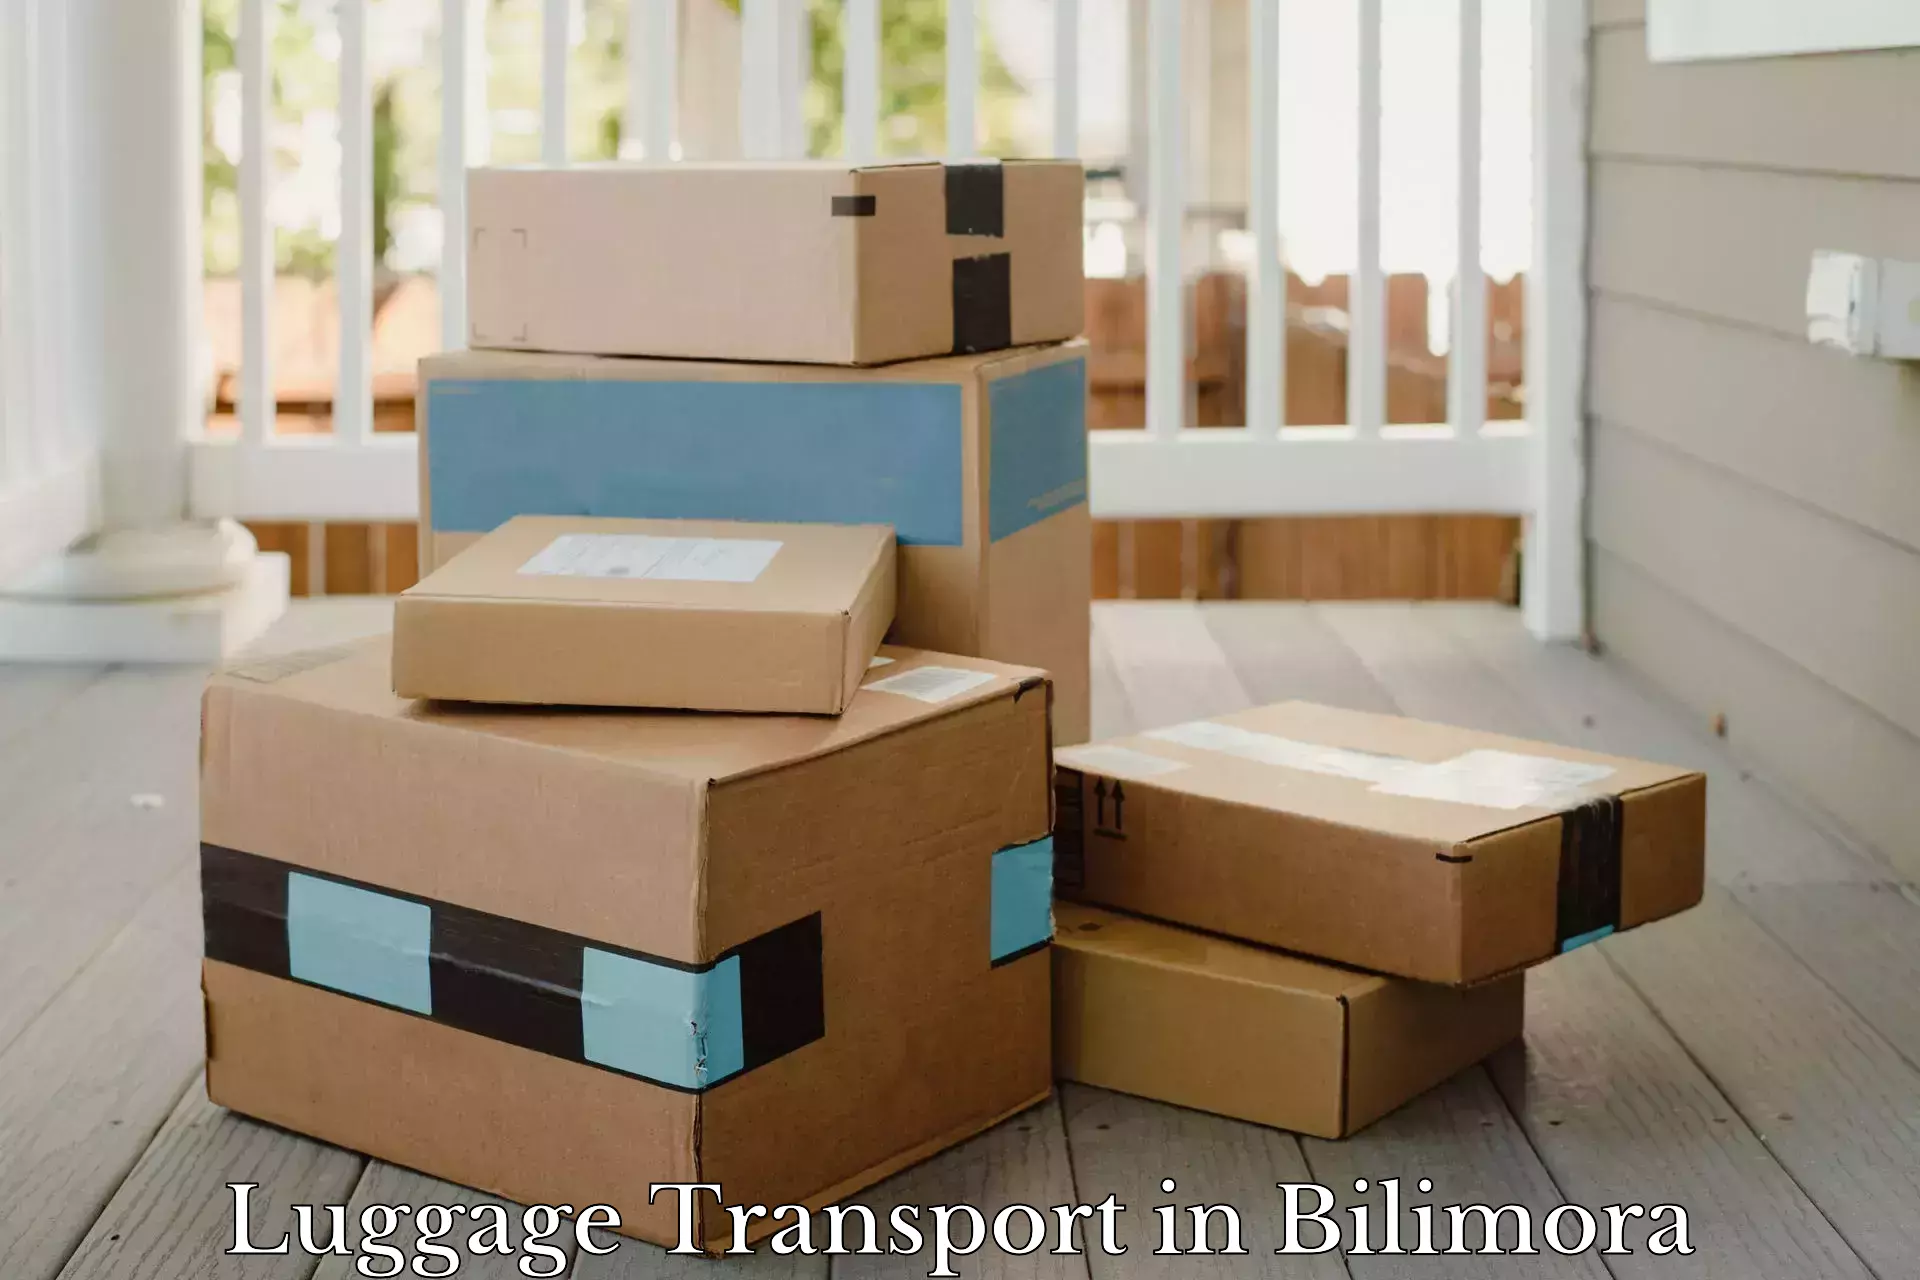 Instant baggage transport quote in Bilimora